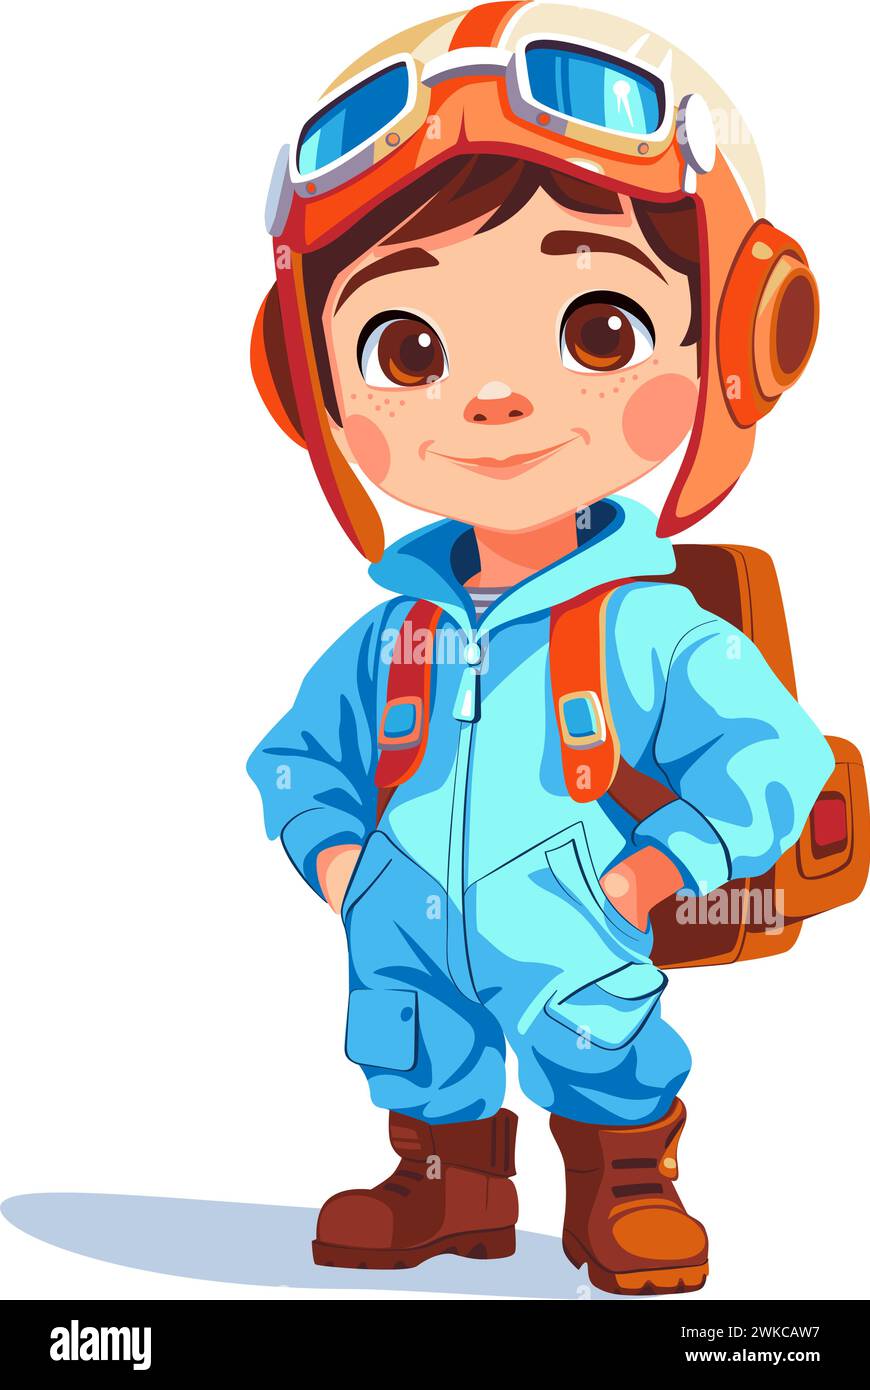 Cartoon kid pilot standing with aviator goggles and happy smiling Stock Vector